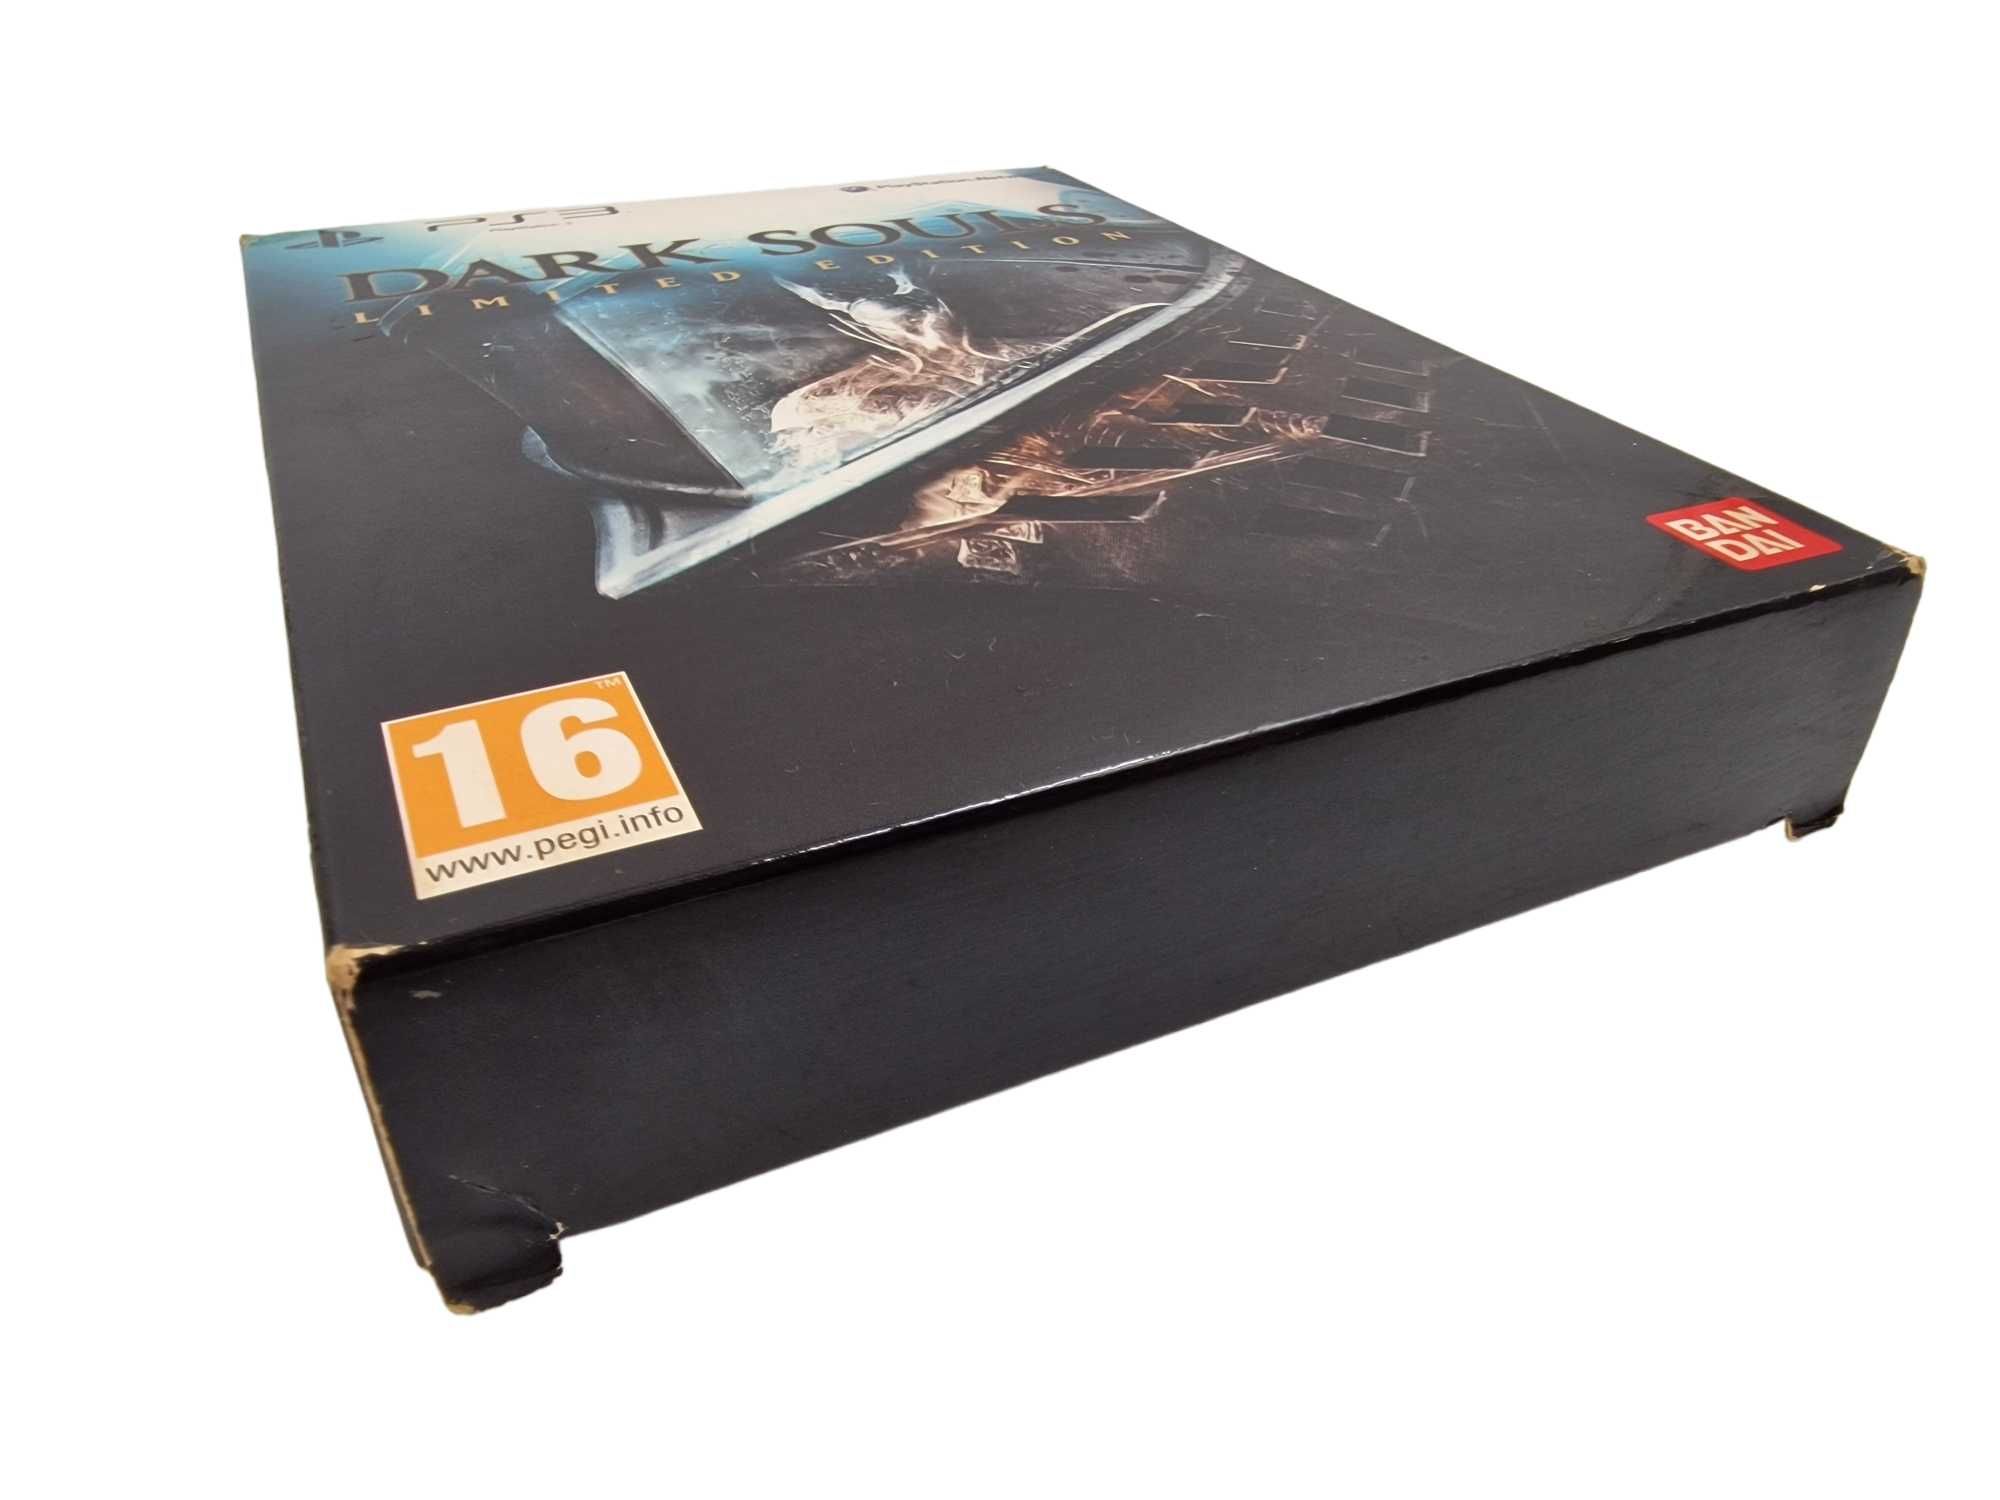 Dark Souls Limited Edition PS3 PlayStation 3 bez gry